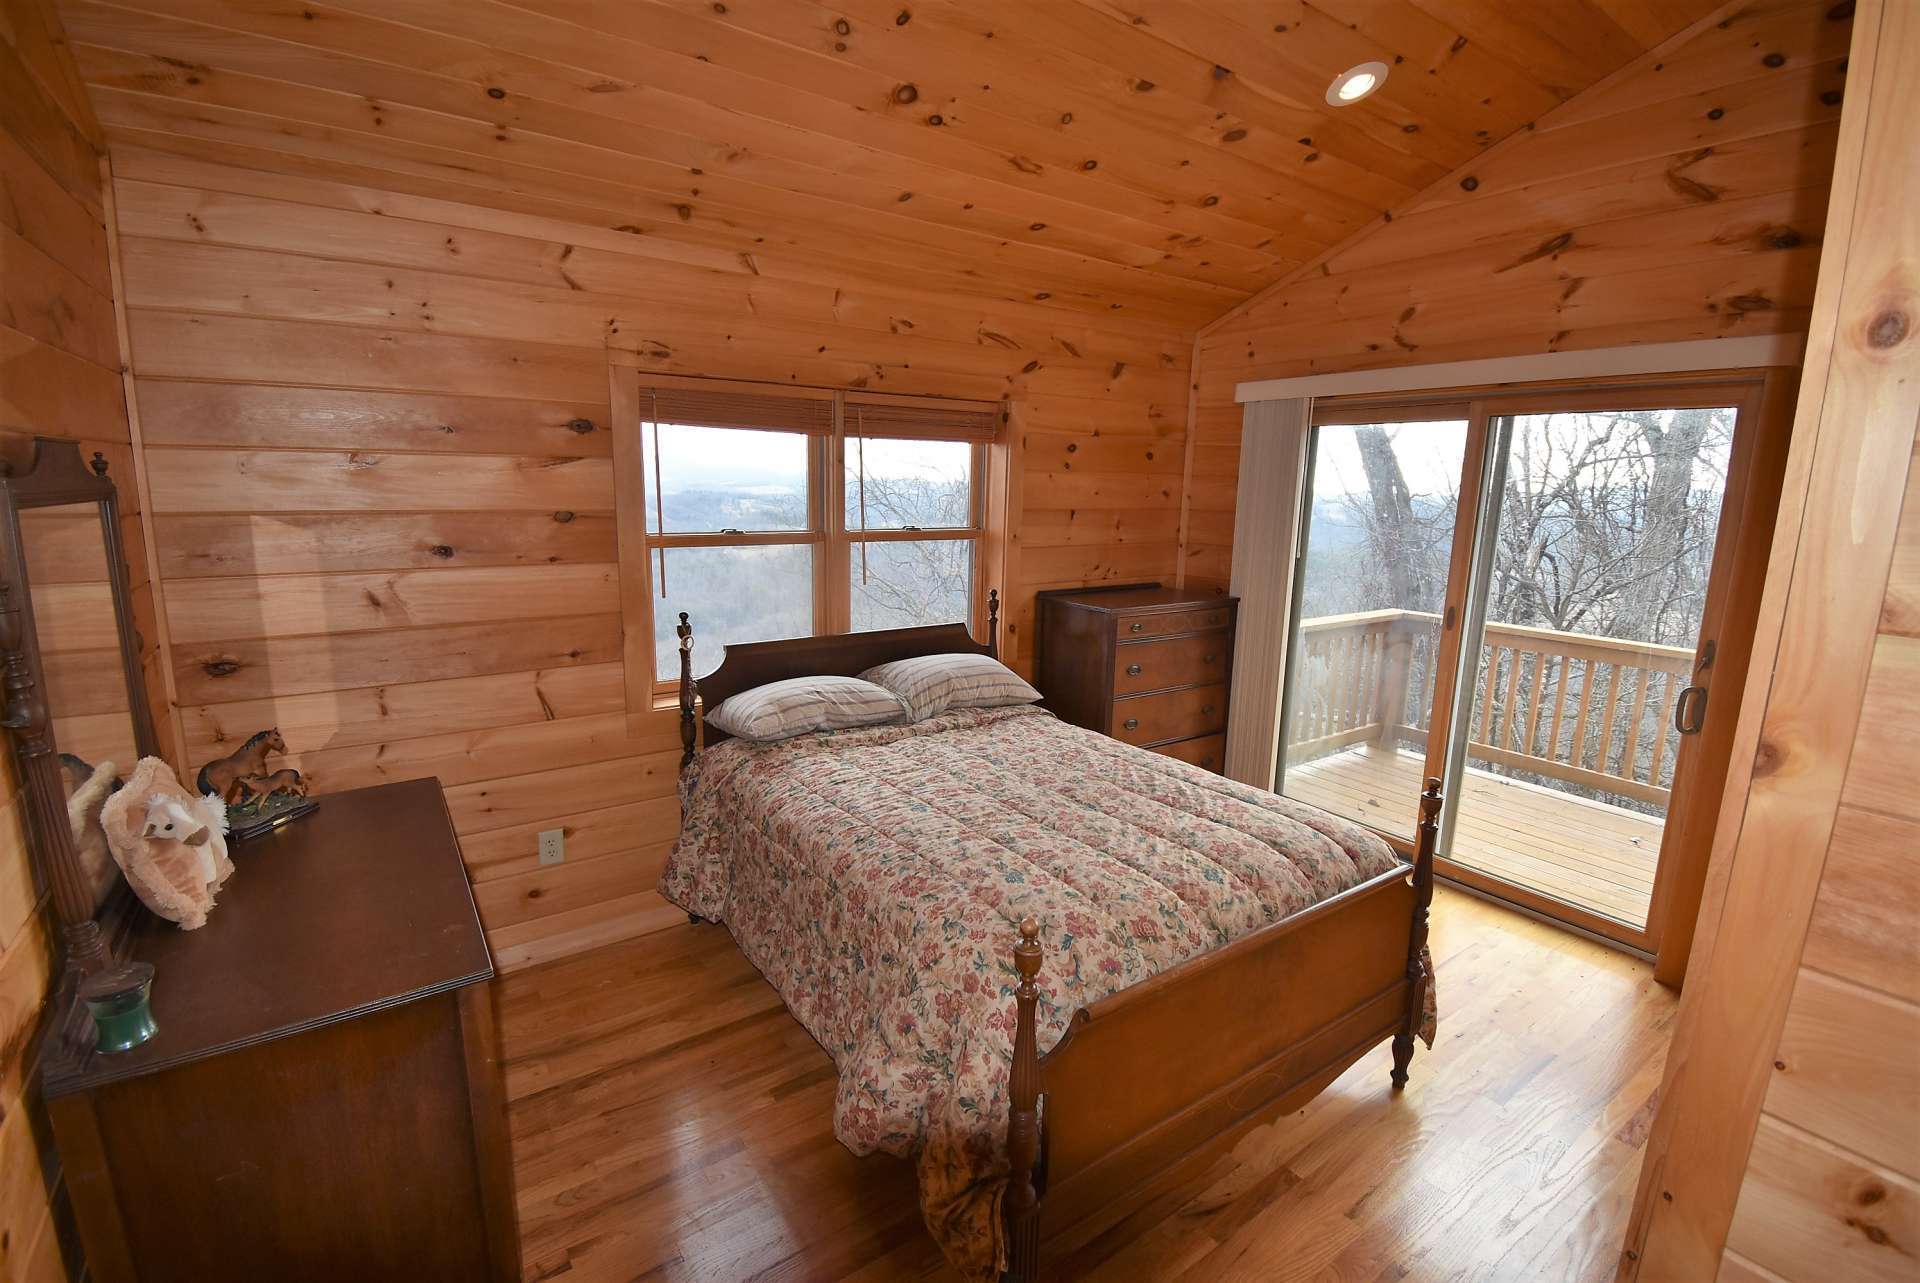 This upper level bedroom features access to a private upper level balcony to enjoy the views.